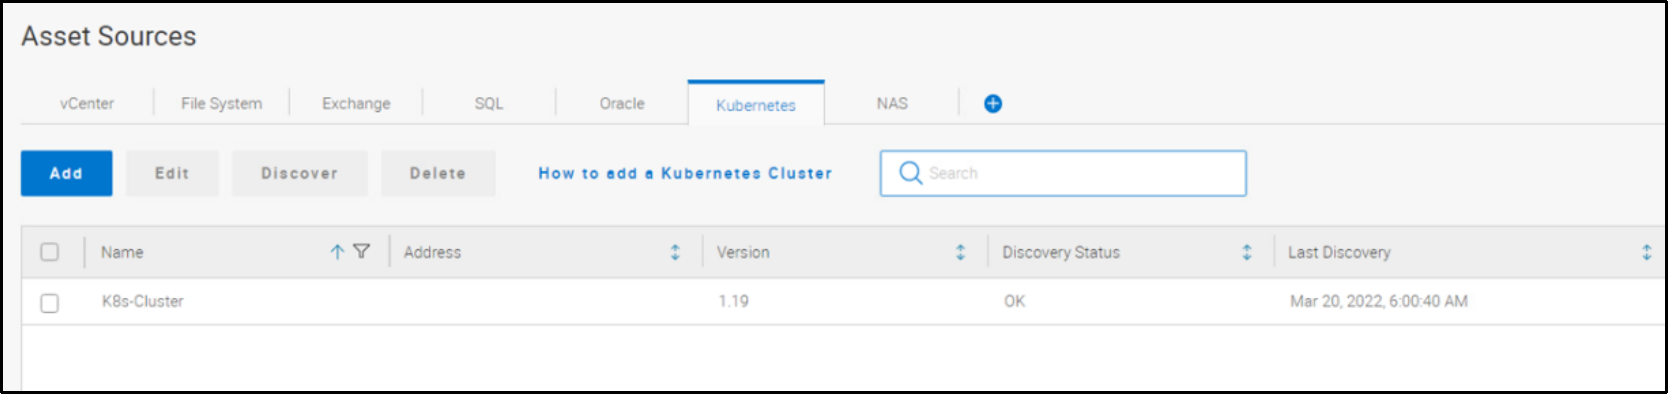 This image shows the Kubernetes cluster asset source discovery in PowerProtect Data Manager UI.